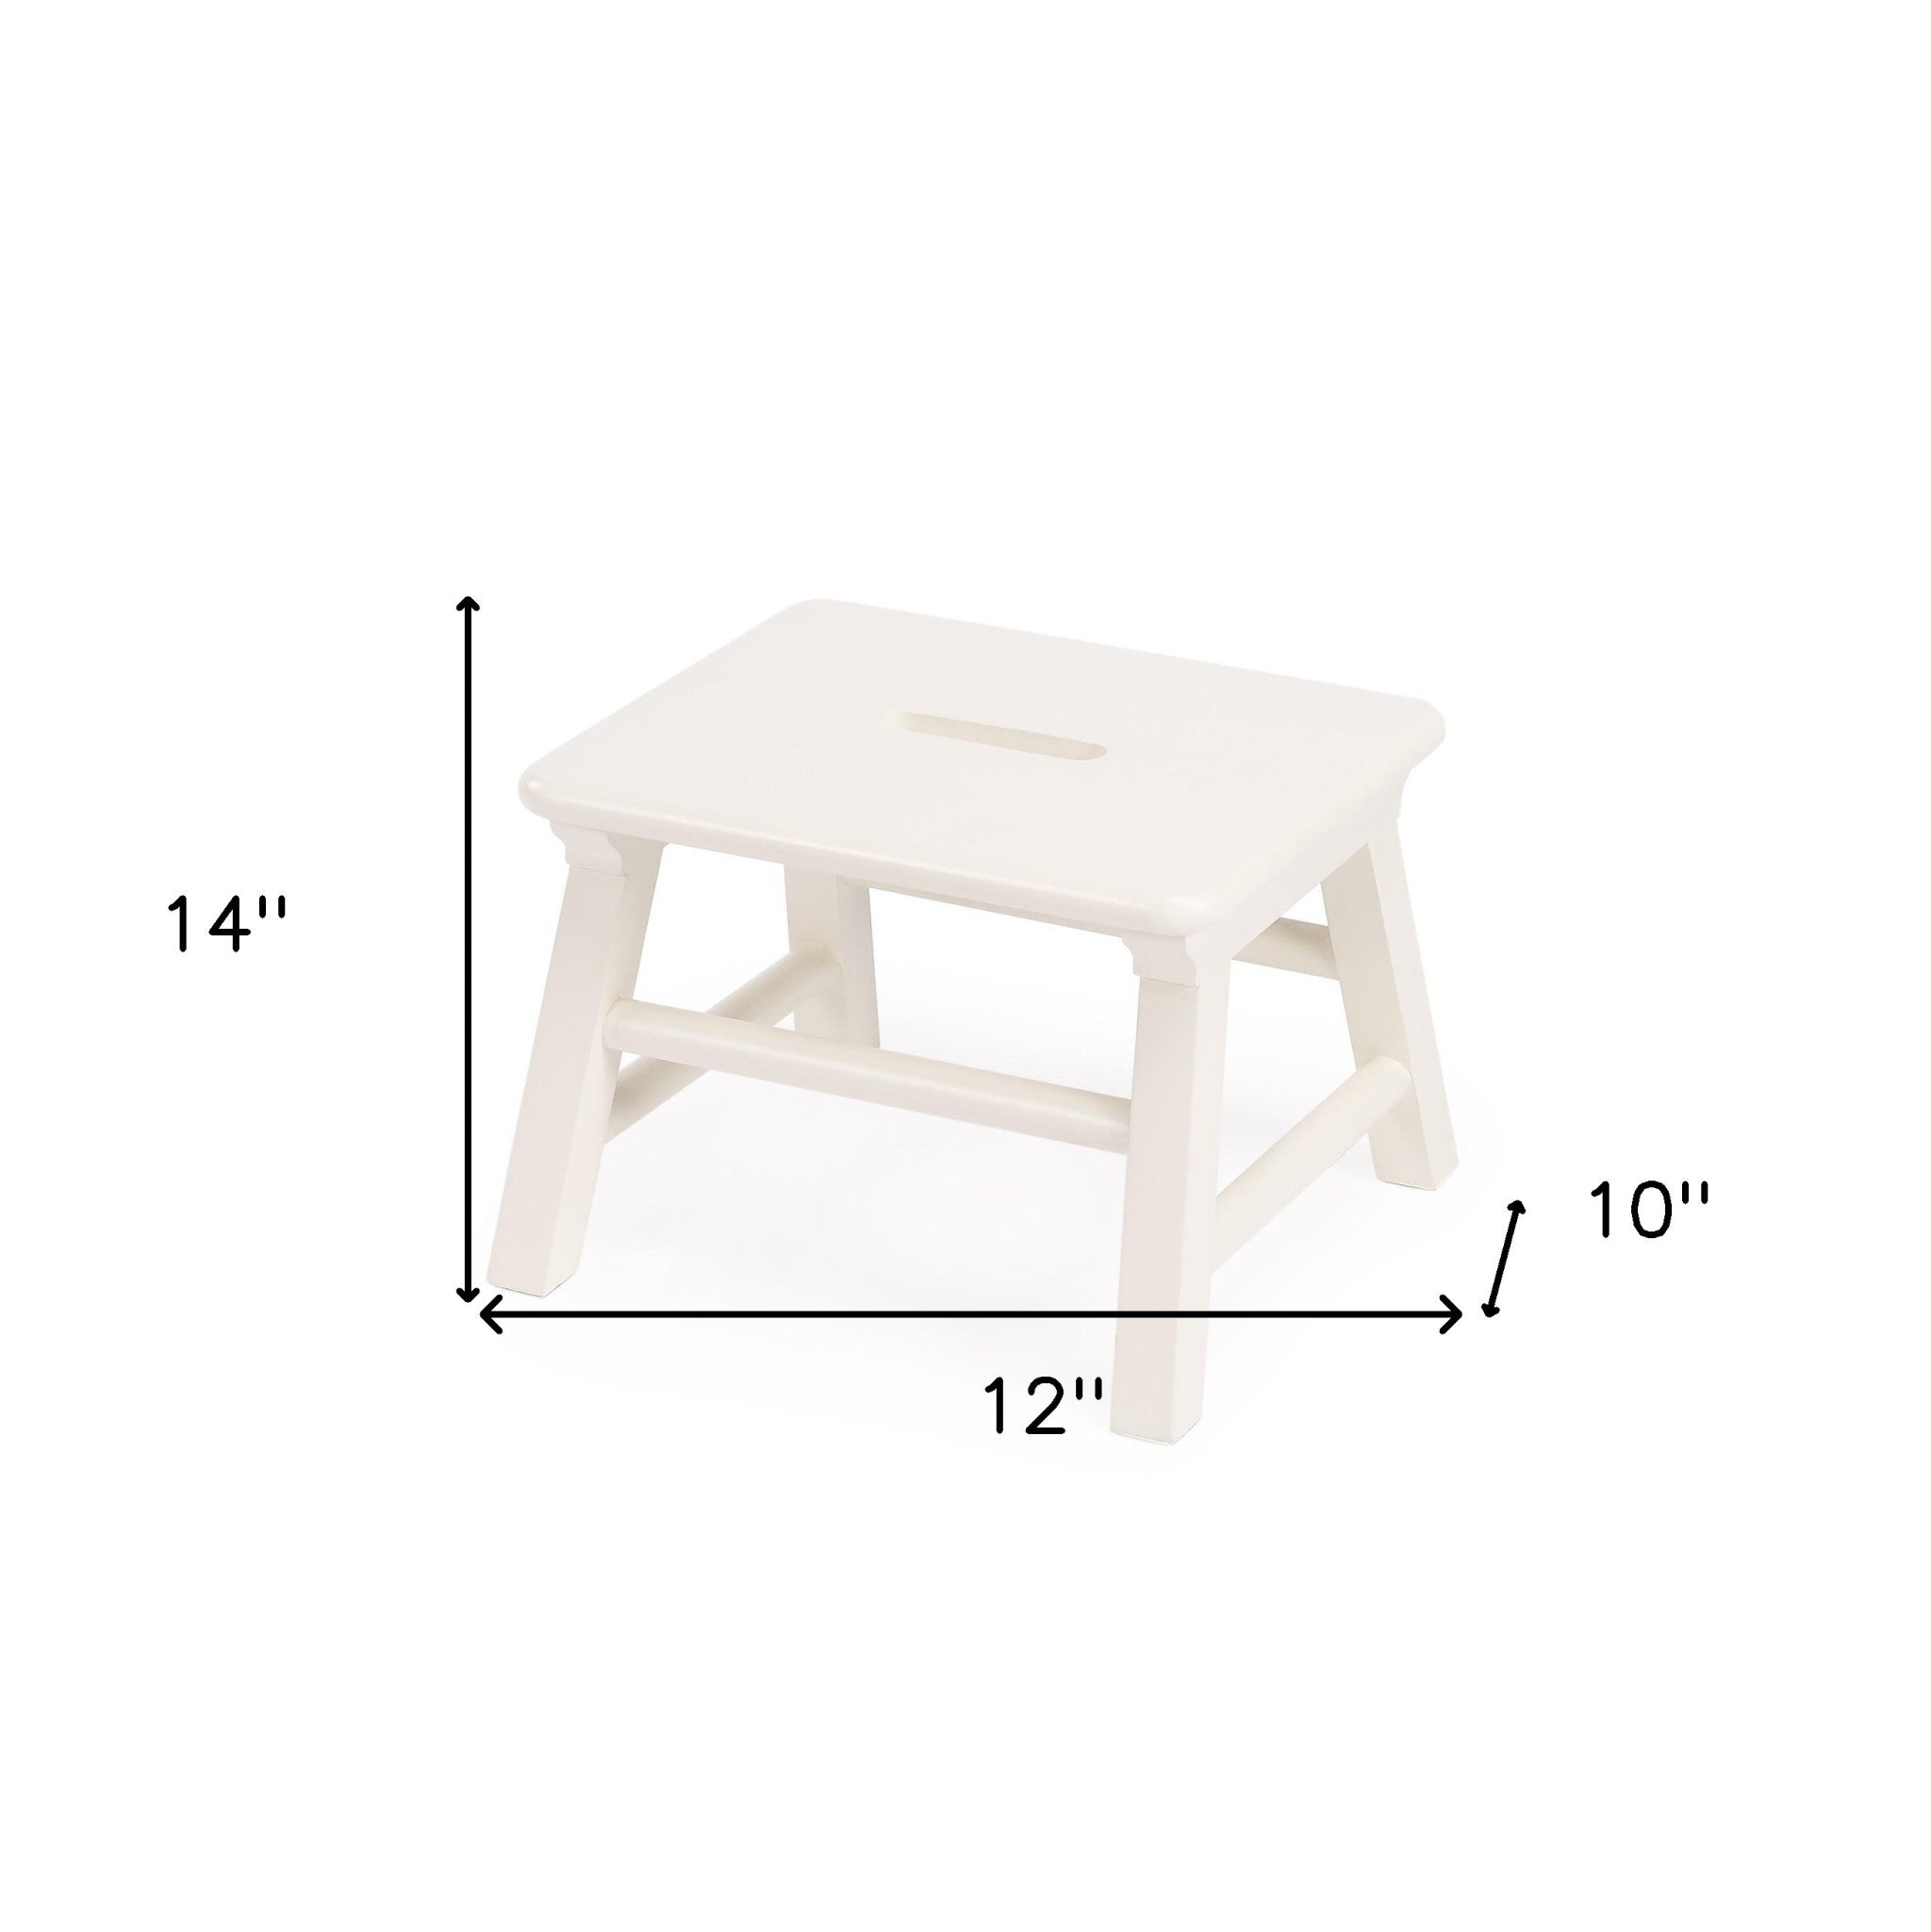 10" White Manufactured Wood Backless Bar Chair